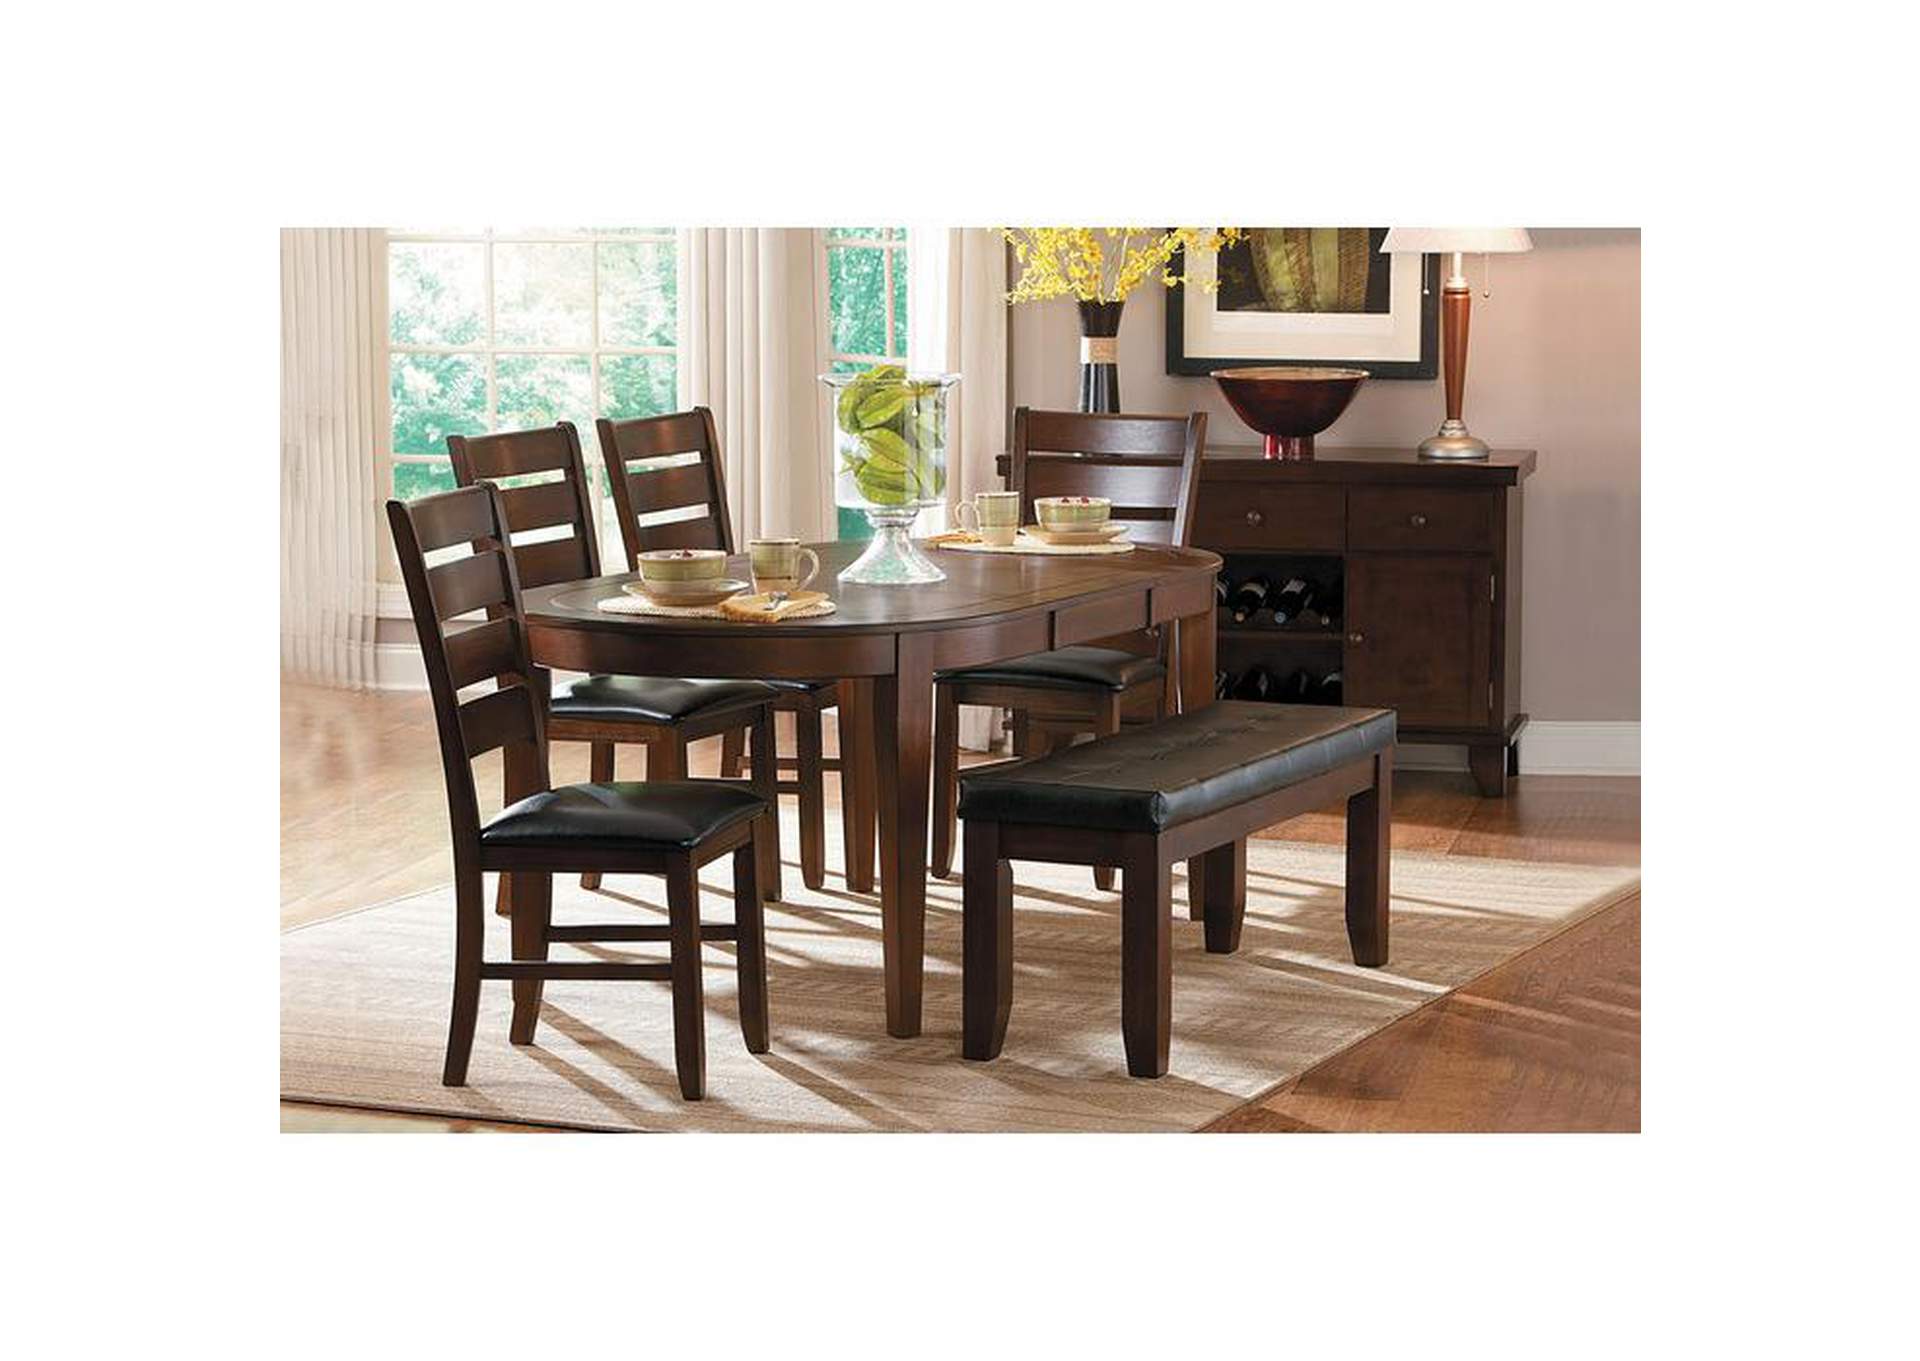 Ameillia Oval Dining Table,Homelegance